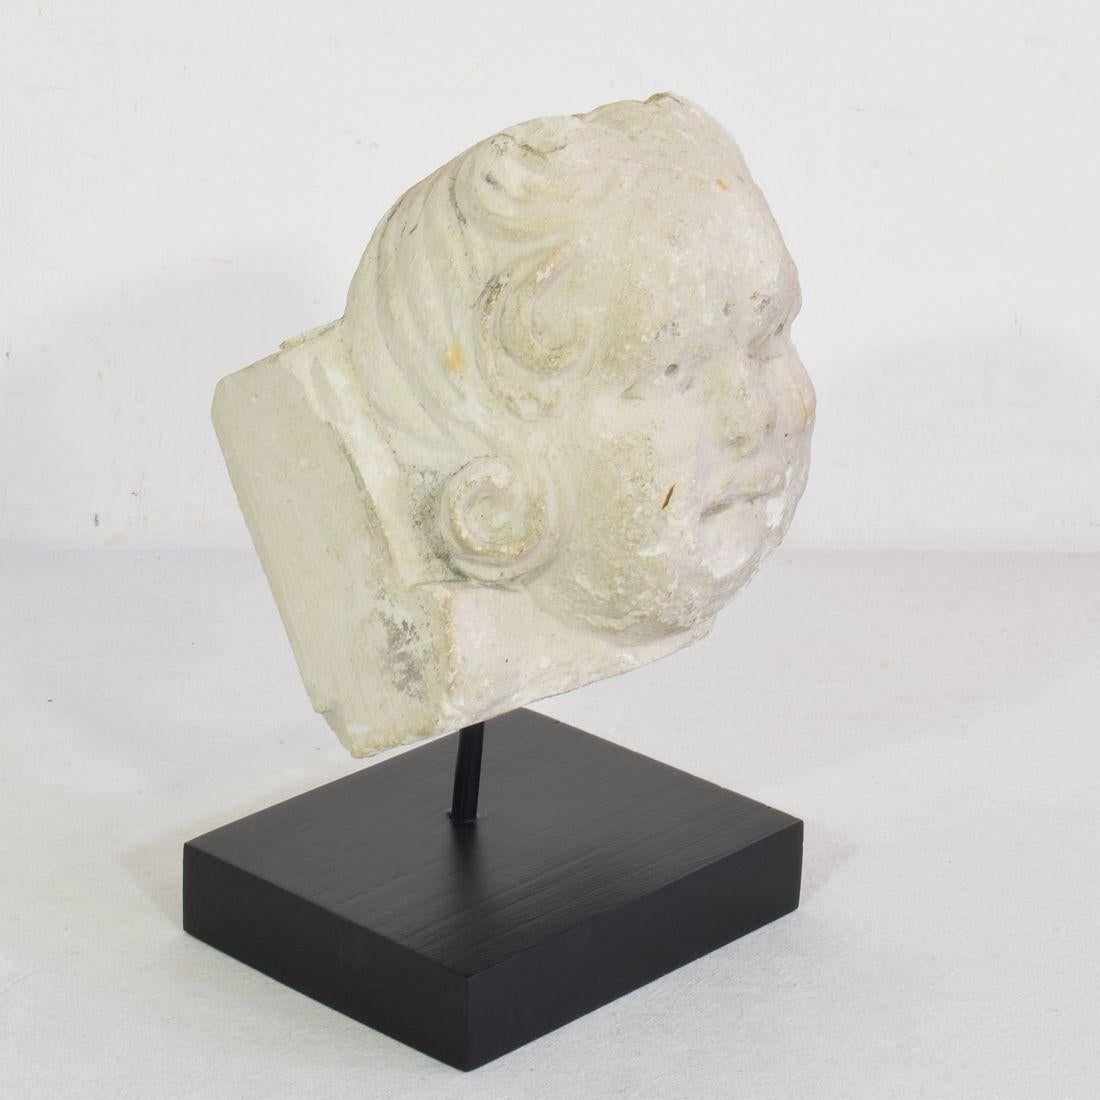 Baroque French, 17th / 18th Century Carved Stone Angel Head Ornament For Sale